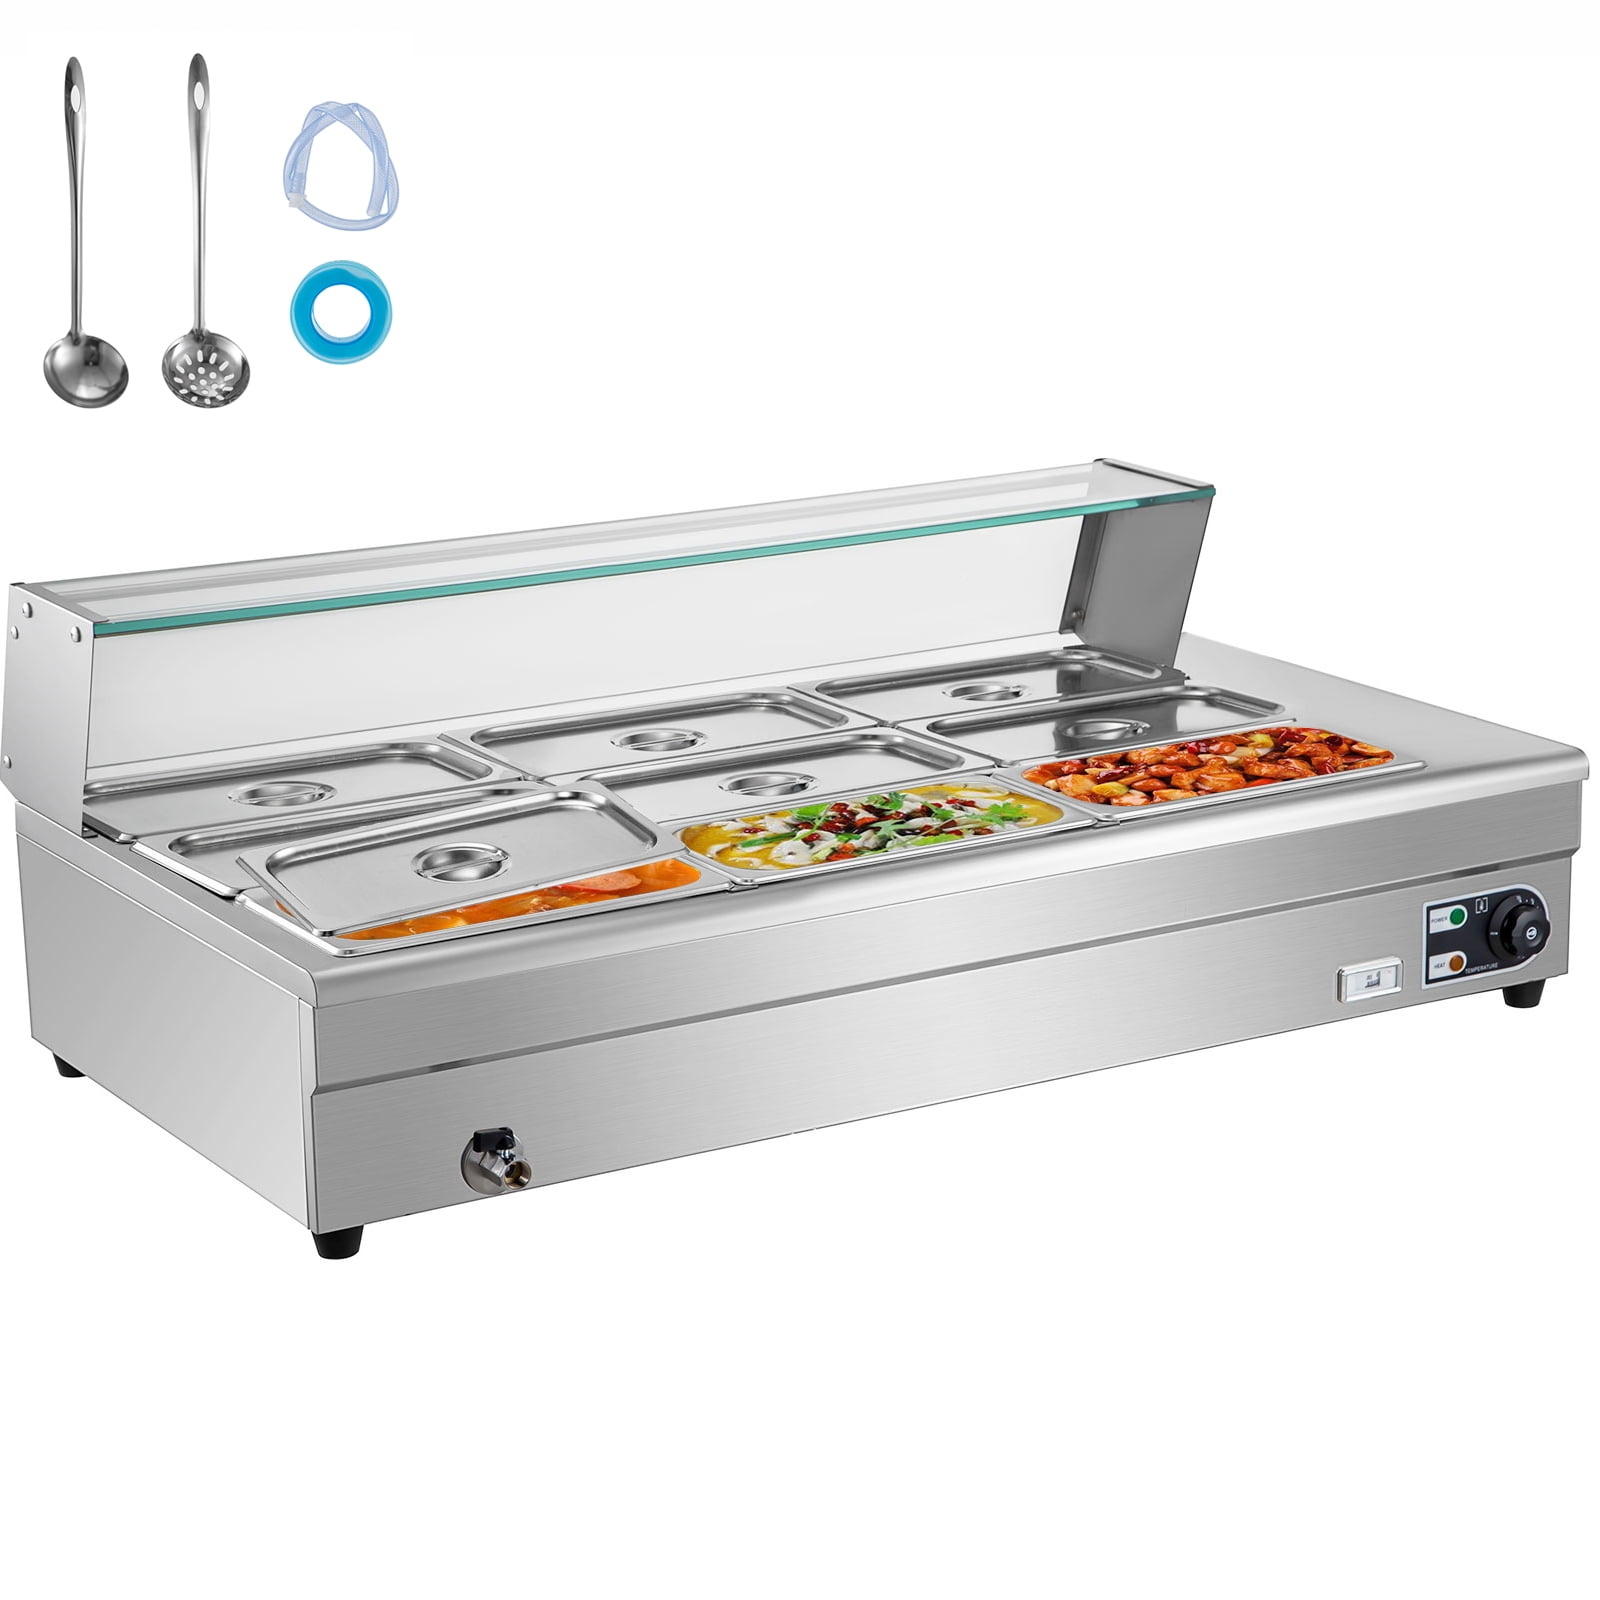 VEVOR 3-Pan Commercial Food Warmer, 3 x 8qt Electric Steam Table, 1500W Professional Countertop Stainless Steel Buffet Bain Marie with 86-185f Temp